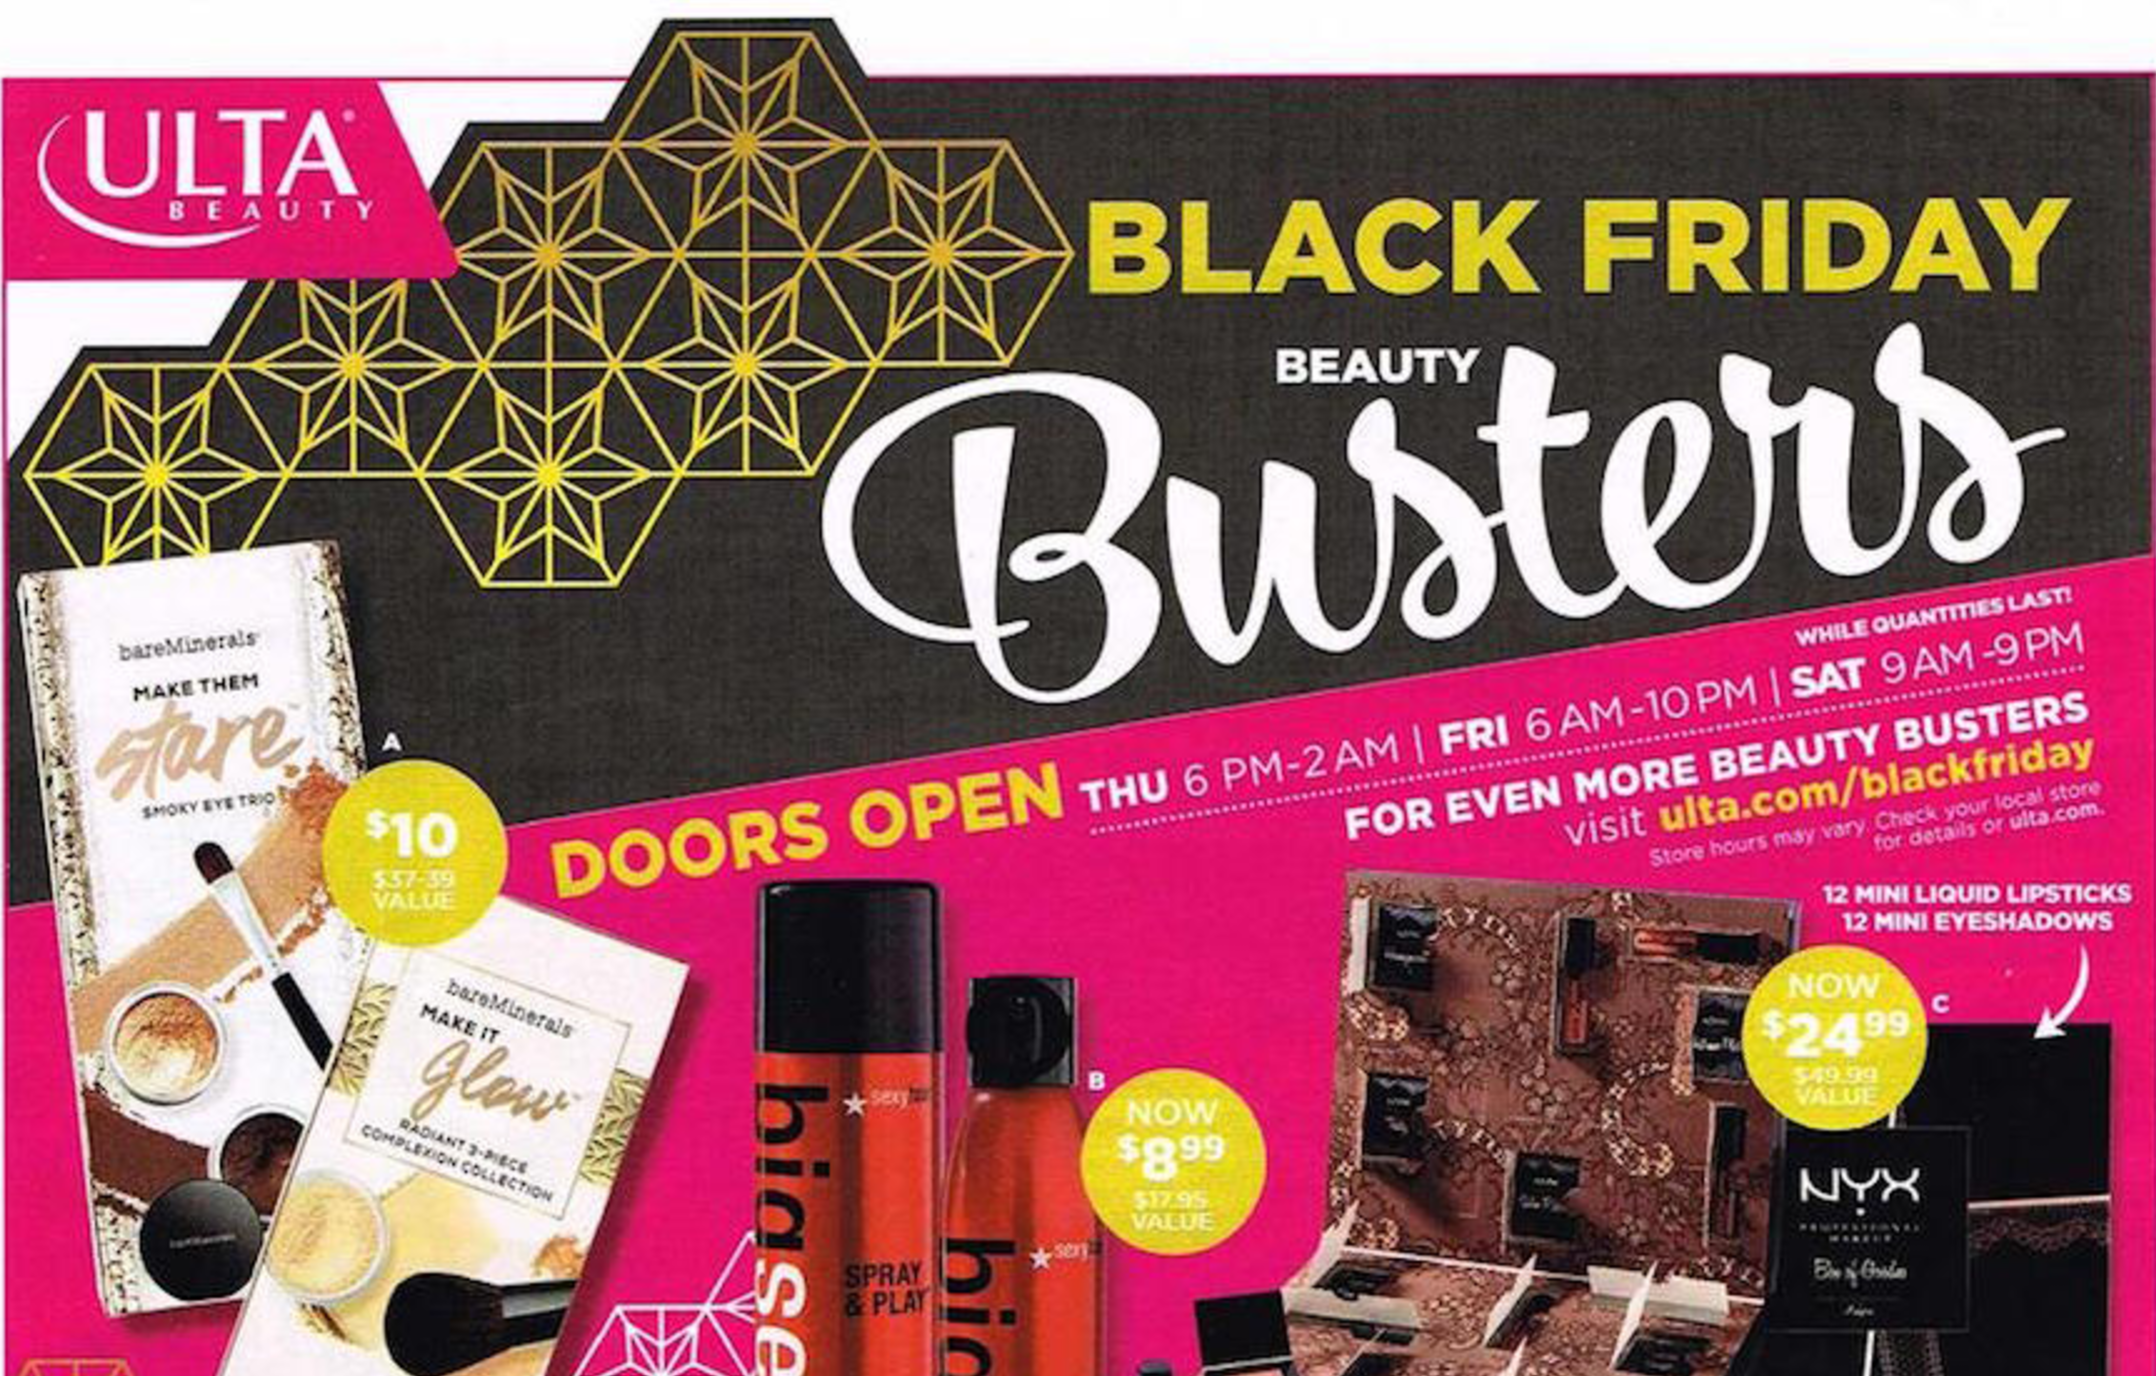 Ulta Black Friday Ad 2016 :: Southern Savers - How To Create Black Friday Deals